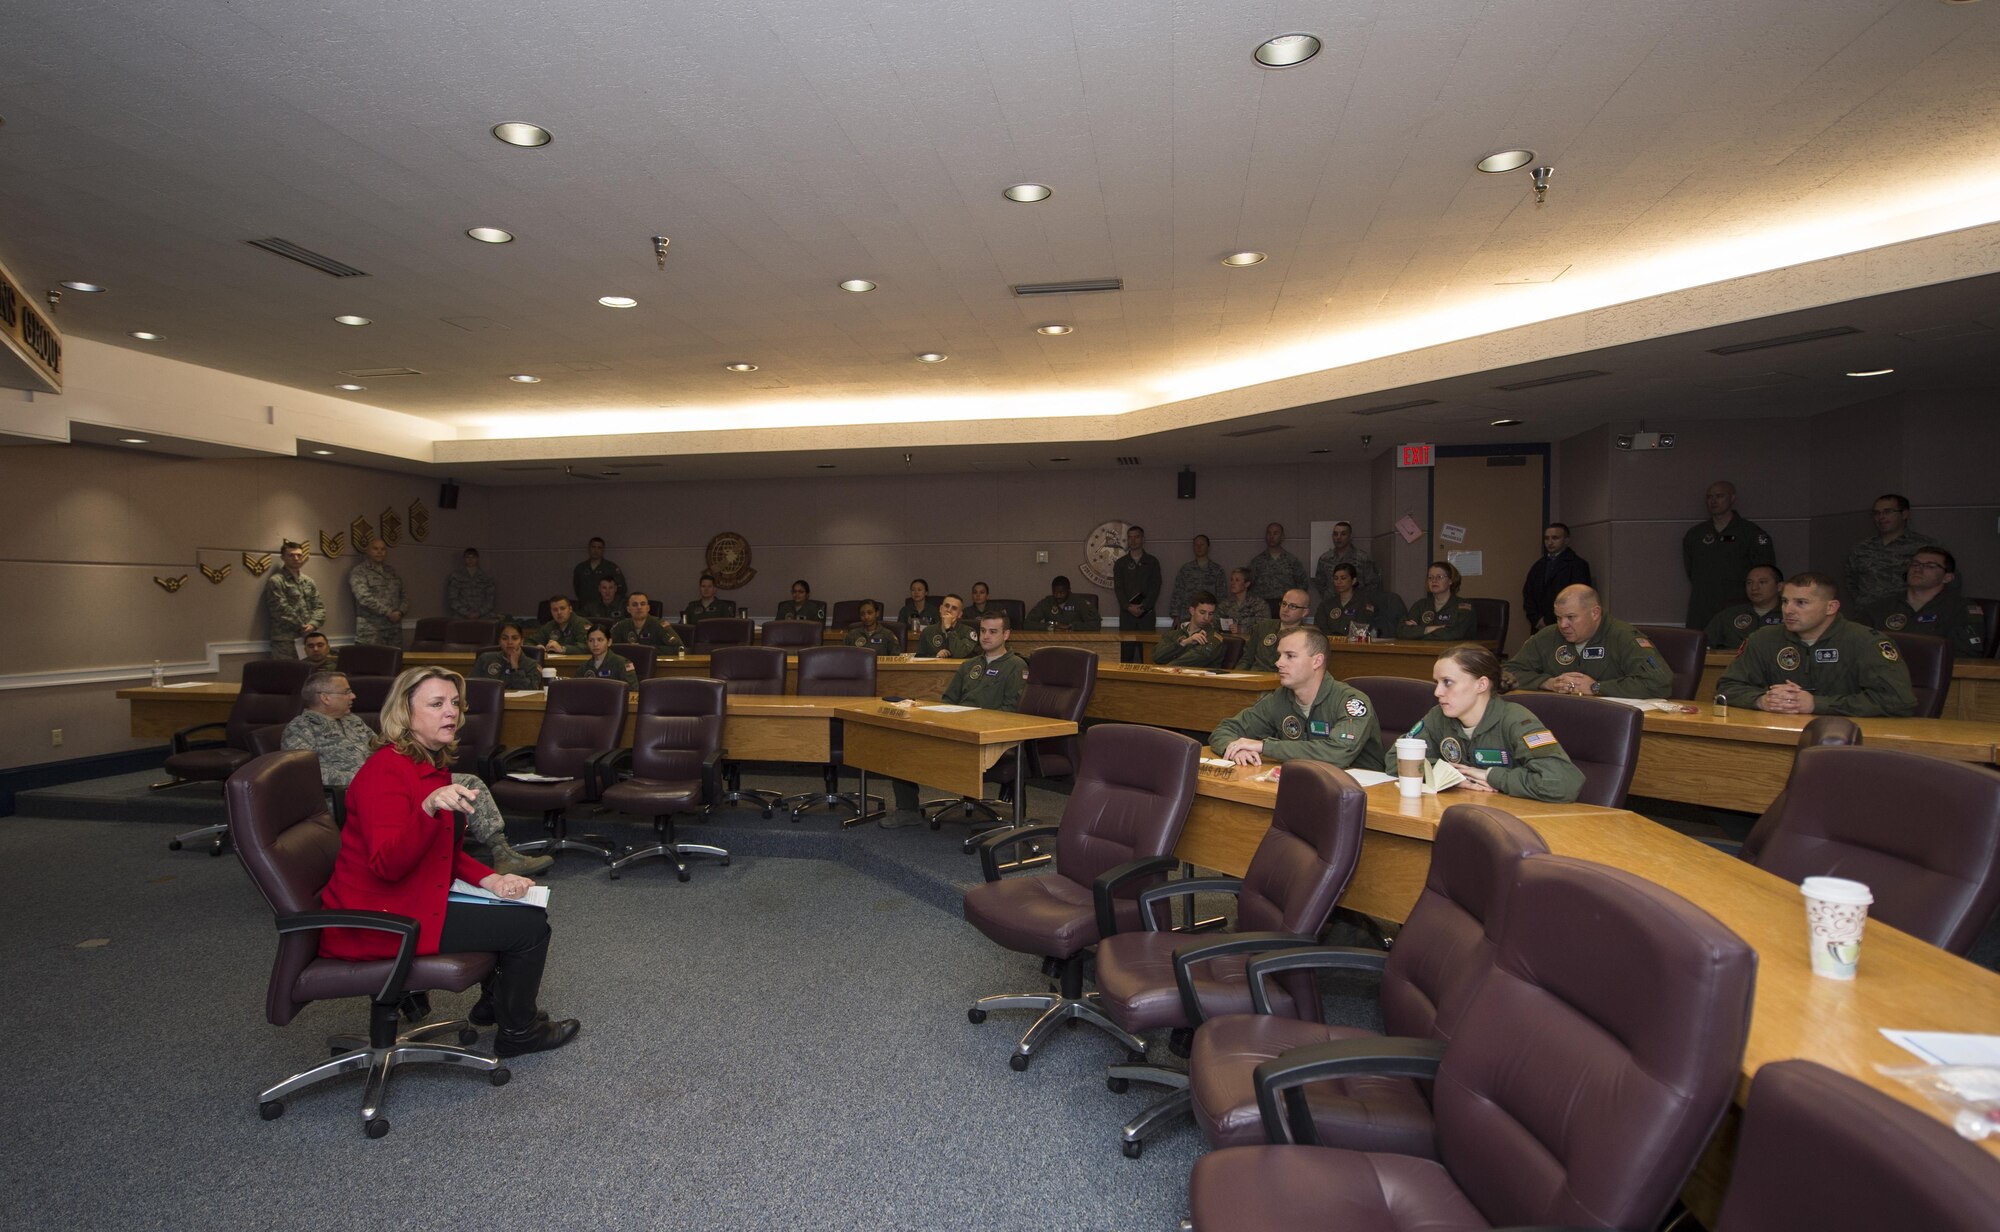 Secretary of the Air Force Deborah Lee James addresses missile combat crews at their pre-departure briefing at F.E. Warren Air Force Base, Wyo., Dec. 8, 2016. She emphasized that the ICBM mission remains critical and relevant to the nation's strategic defense. The SecAF and Lt. Gen. Jack Weinstein, Deputy Chief of Staff for strategic deterrence and nuclear integration visited Warren to speak directly to Airmen on the front lines of the ICBM mission. (U.S. Air Force photo by Staff Sgt. Christopher Ruano)